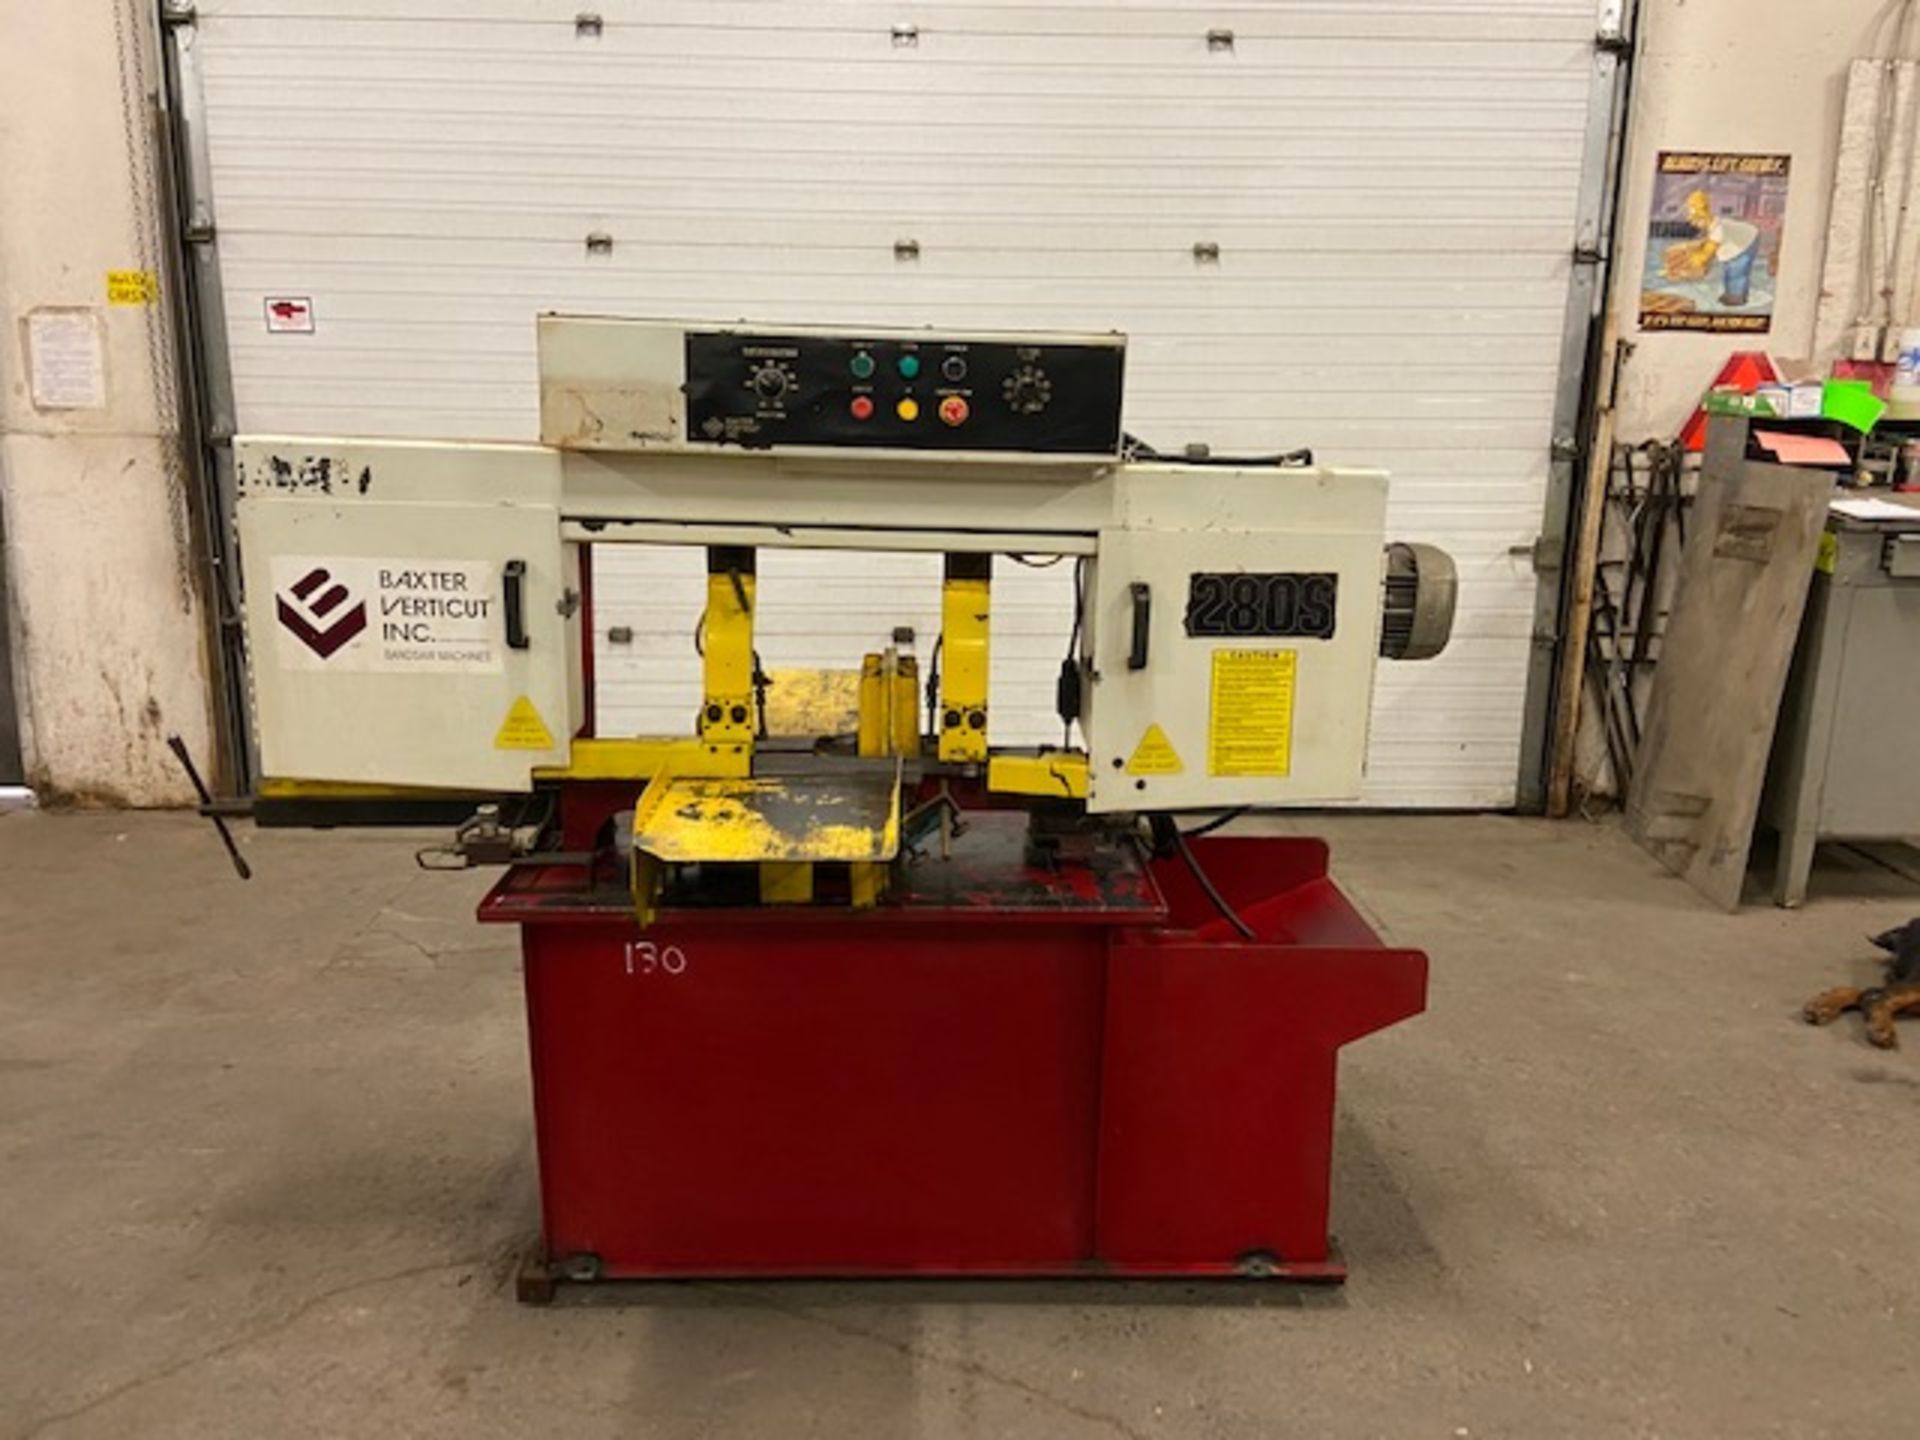 2014 Baxter Vertical model 2808 Horizontal Band Saw 18" x 13" cutting capacity NICE MACHINE with